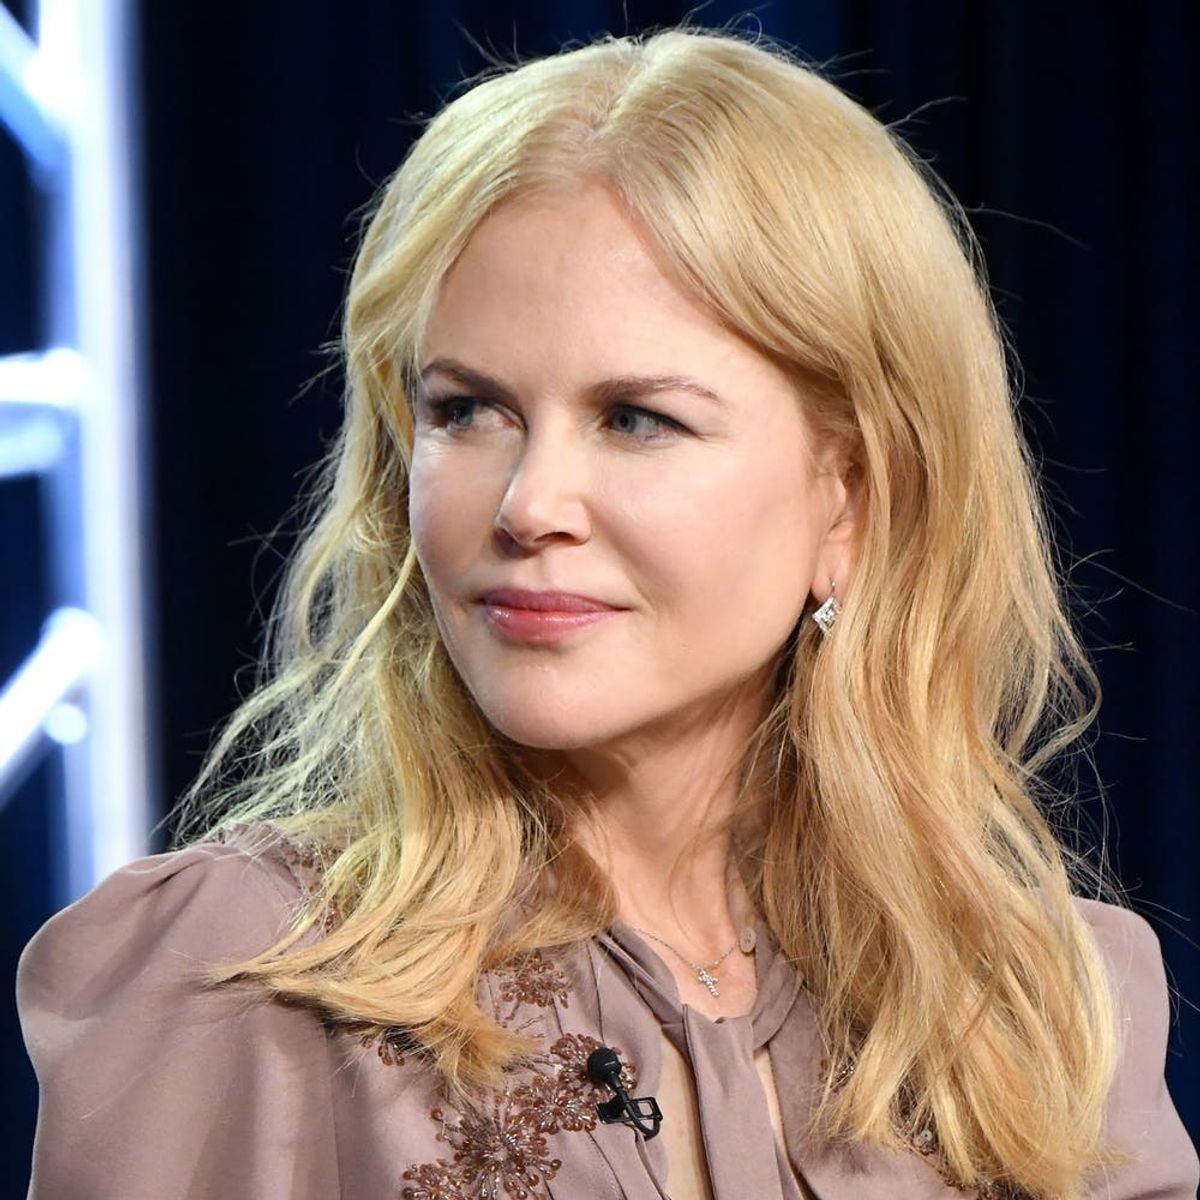 Here’s What Nicole Kidman Has to Say About Those “Pro-Trump” Comments